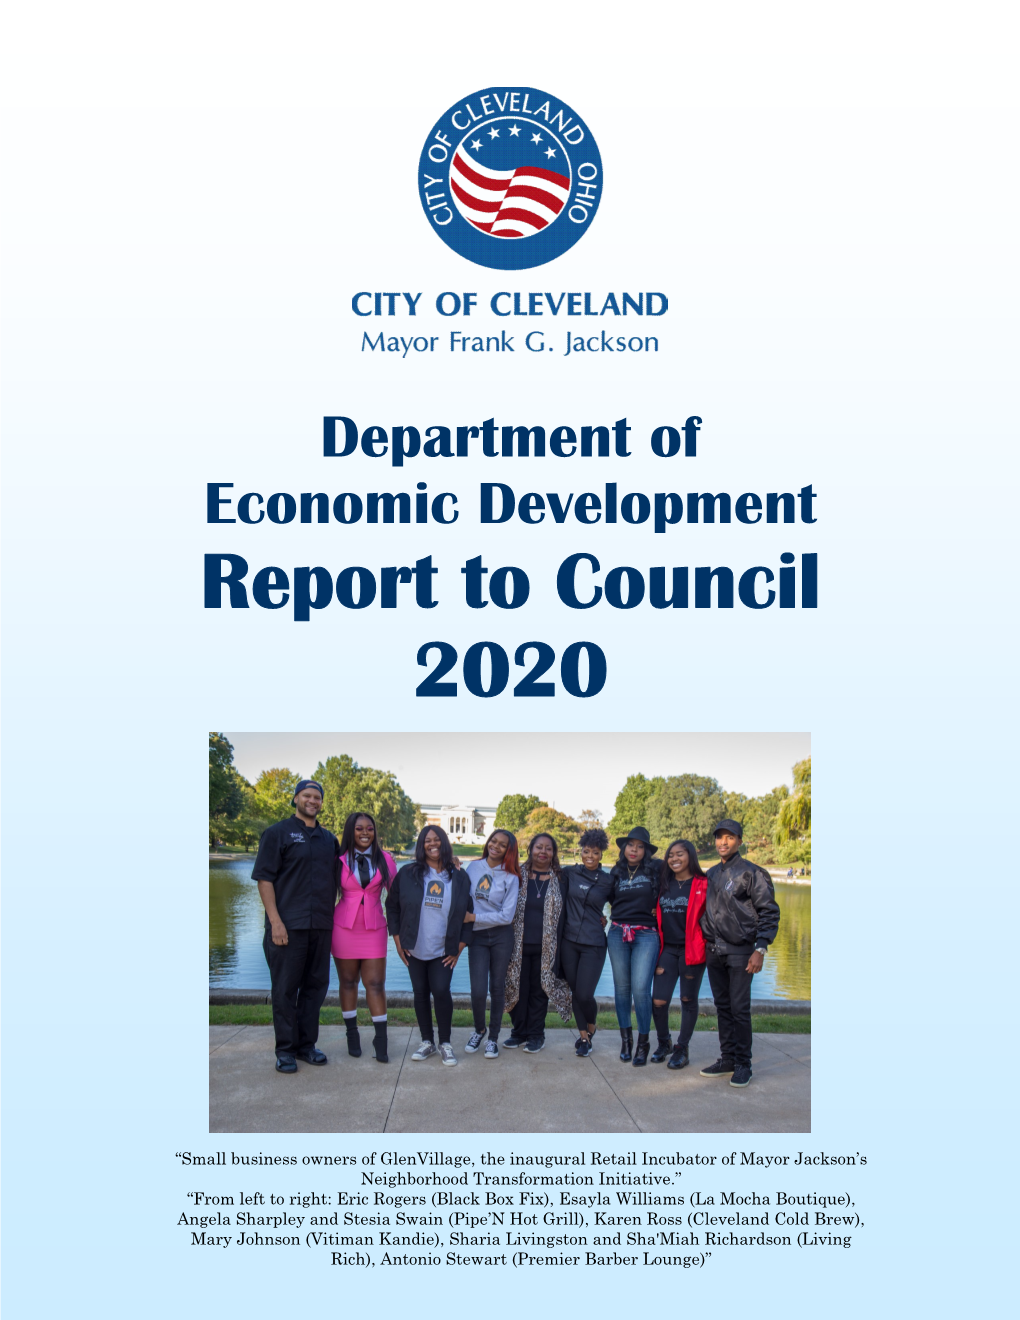 Report to Council 2020